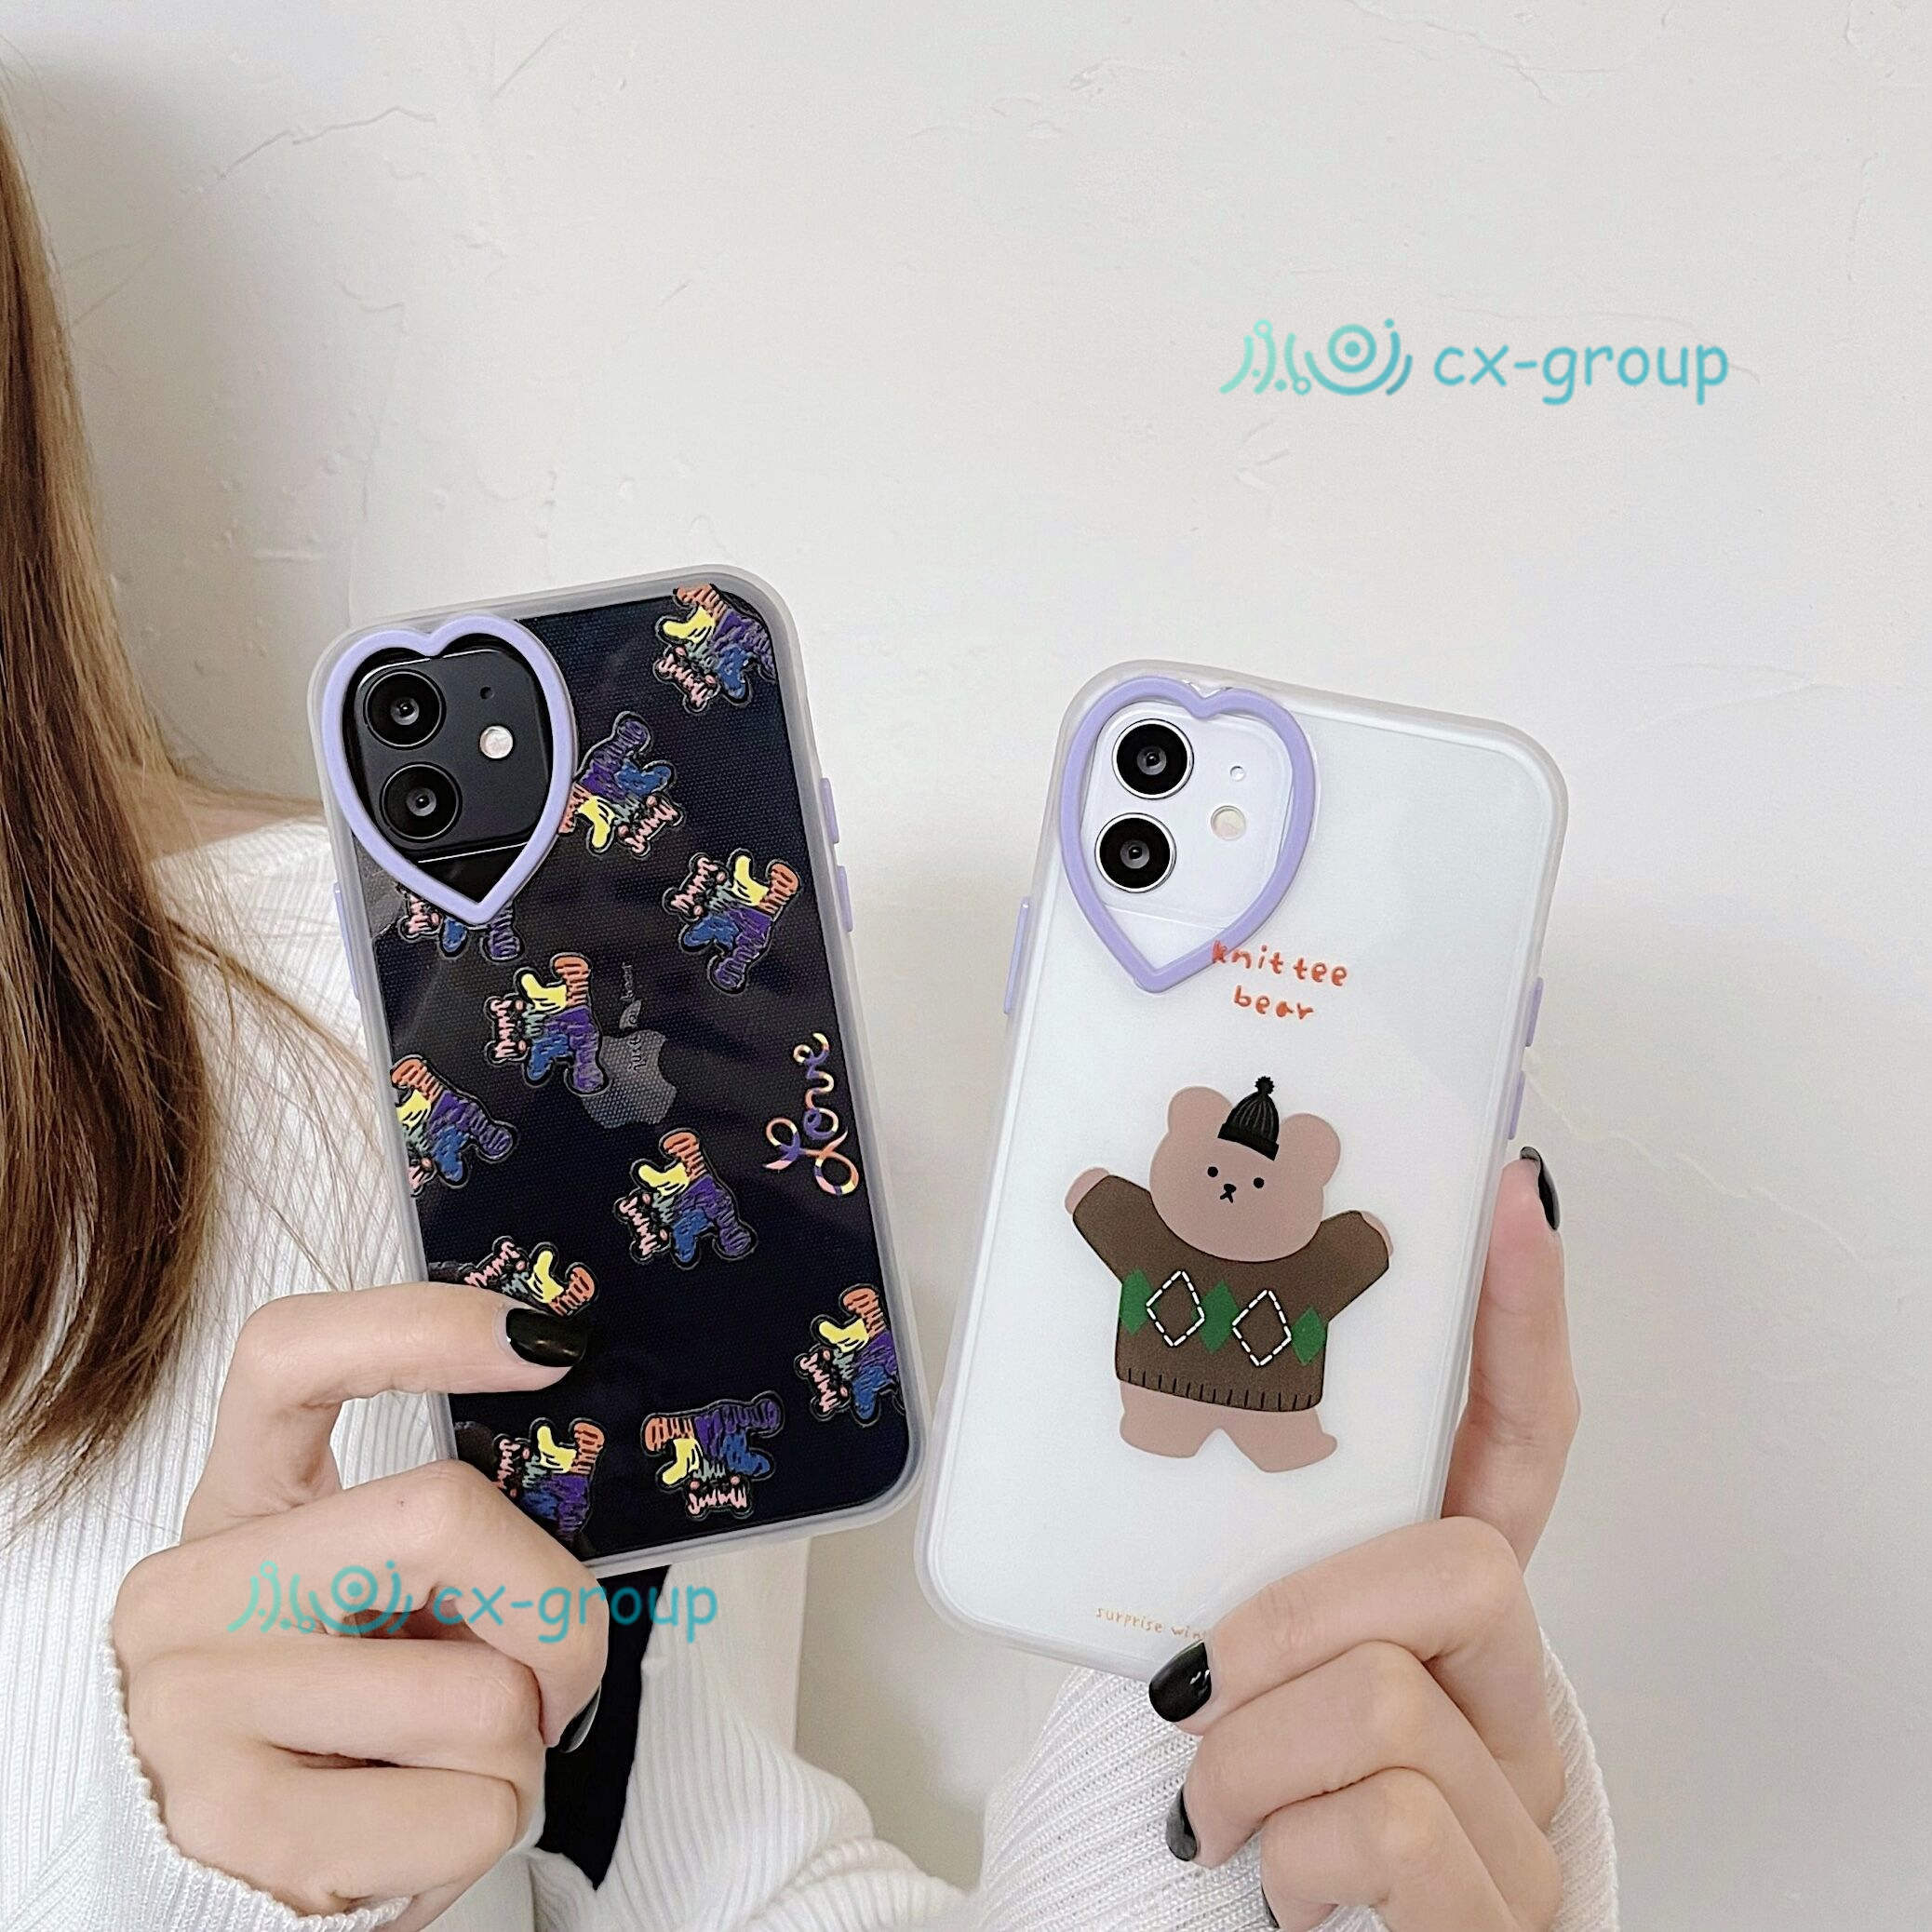 ốp iphone Cute Bear Heart-Shaped Lens Hole Case Apple iphone Case 7+ i7 8 plus soft casing iphone Casing 12 Pro max /12 mini premium soft case for iphone 11 Pro X XS MAX XR full silicone cover camera protector cover